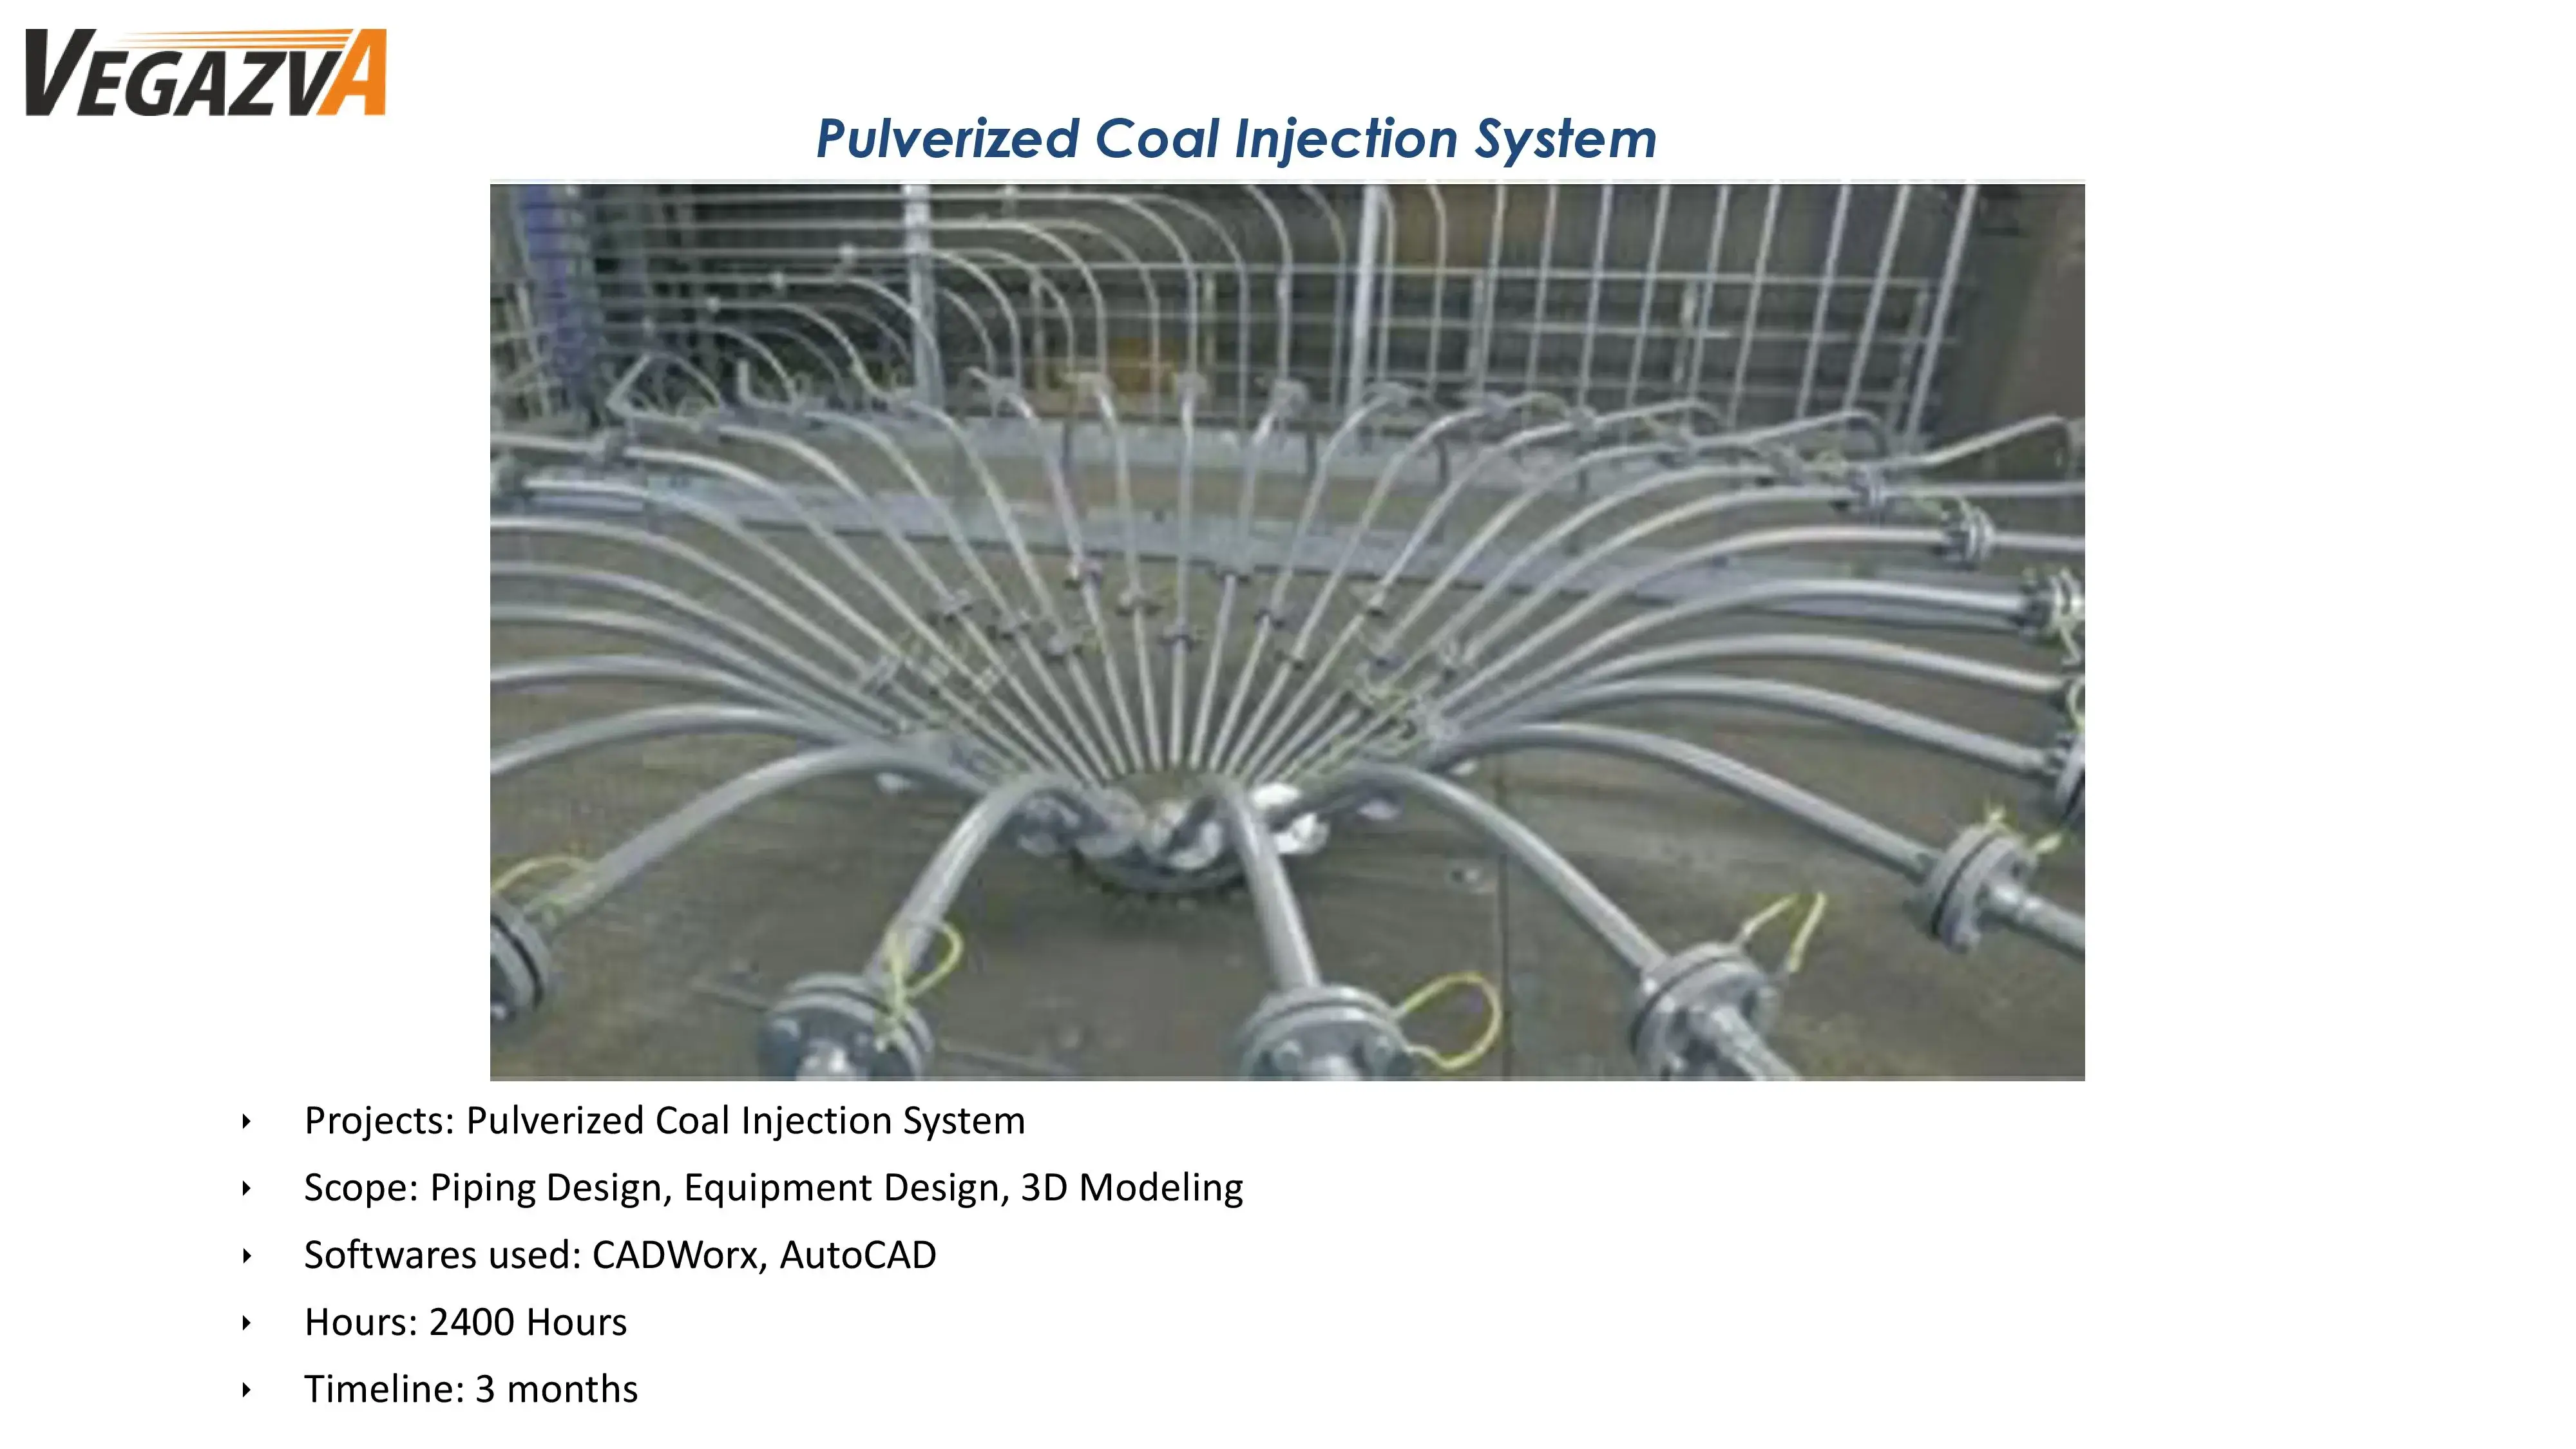 Signature Project - Pulverized Coal Injection System